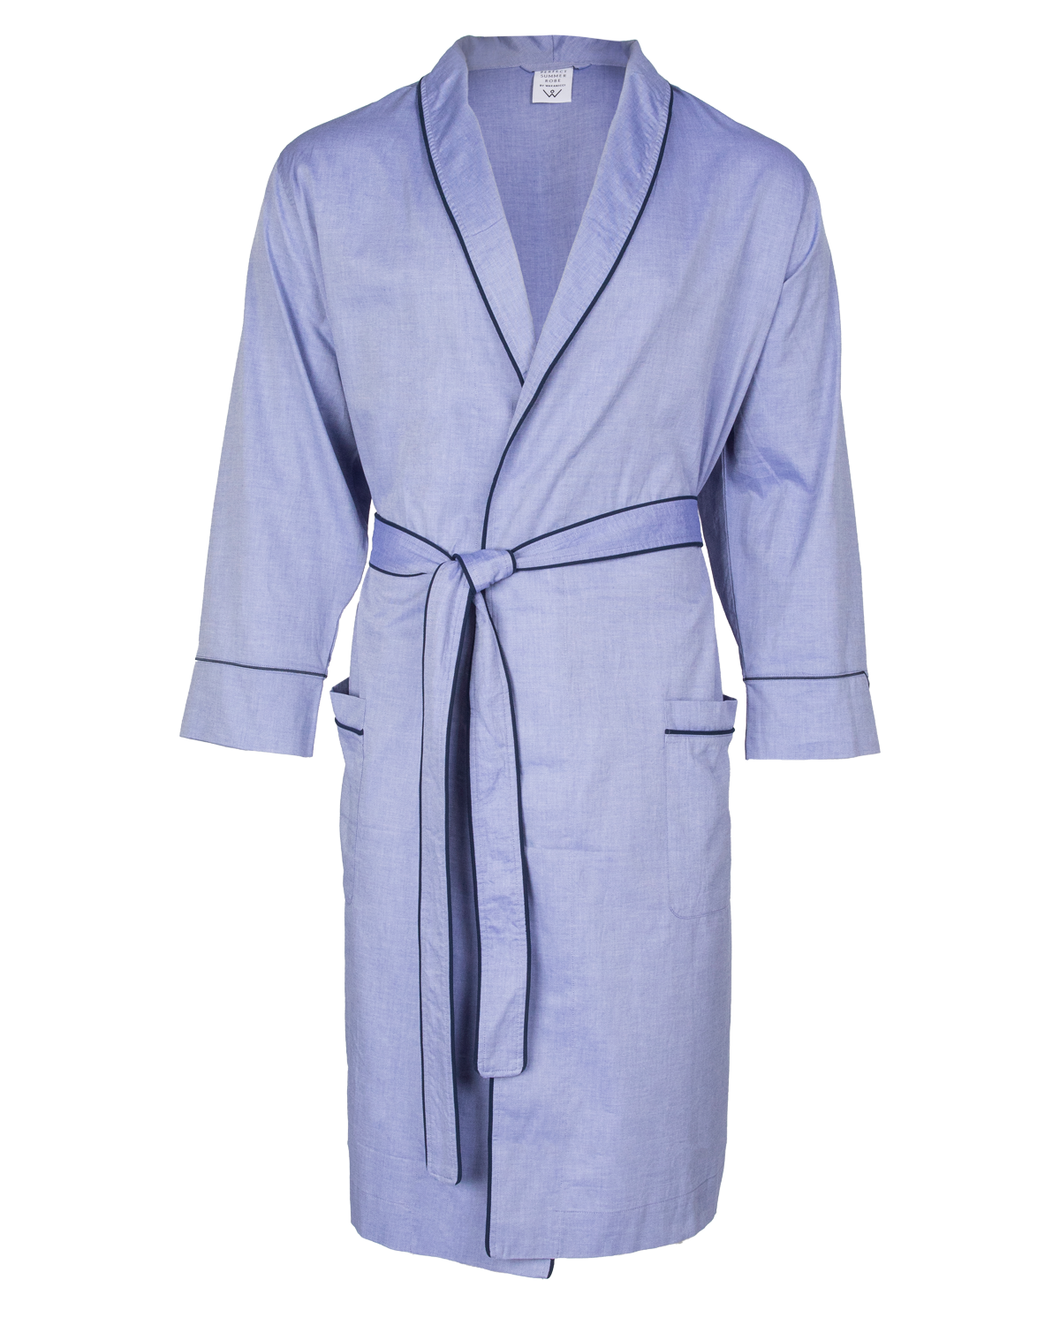 The Perfect Summer Robe